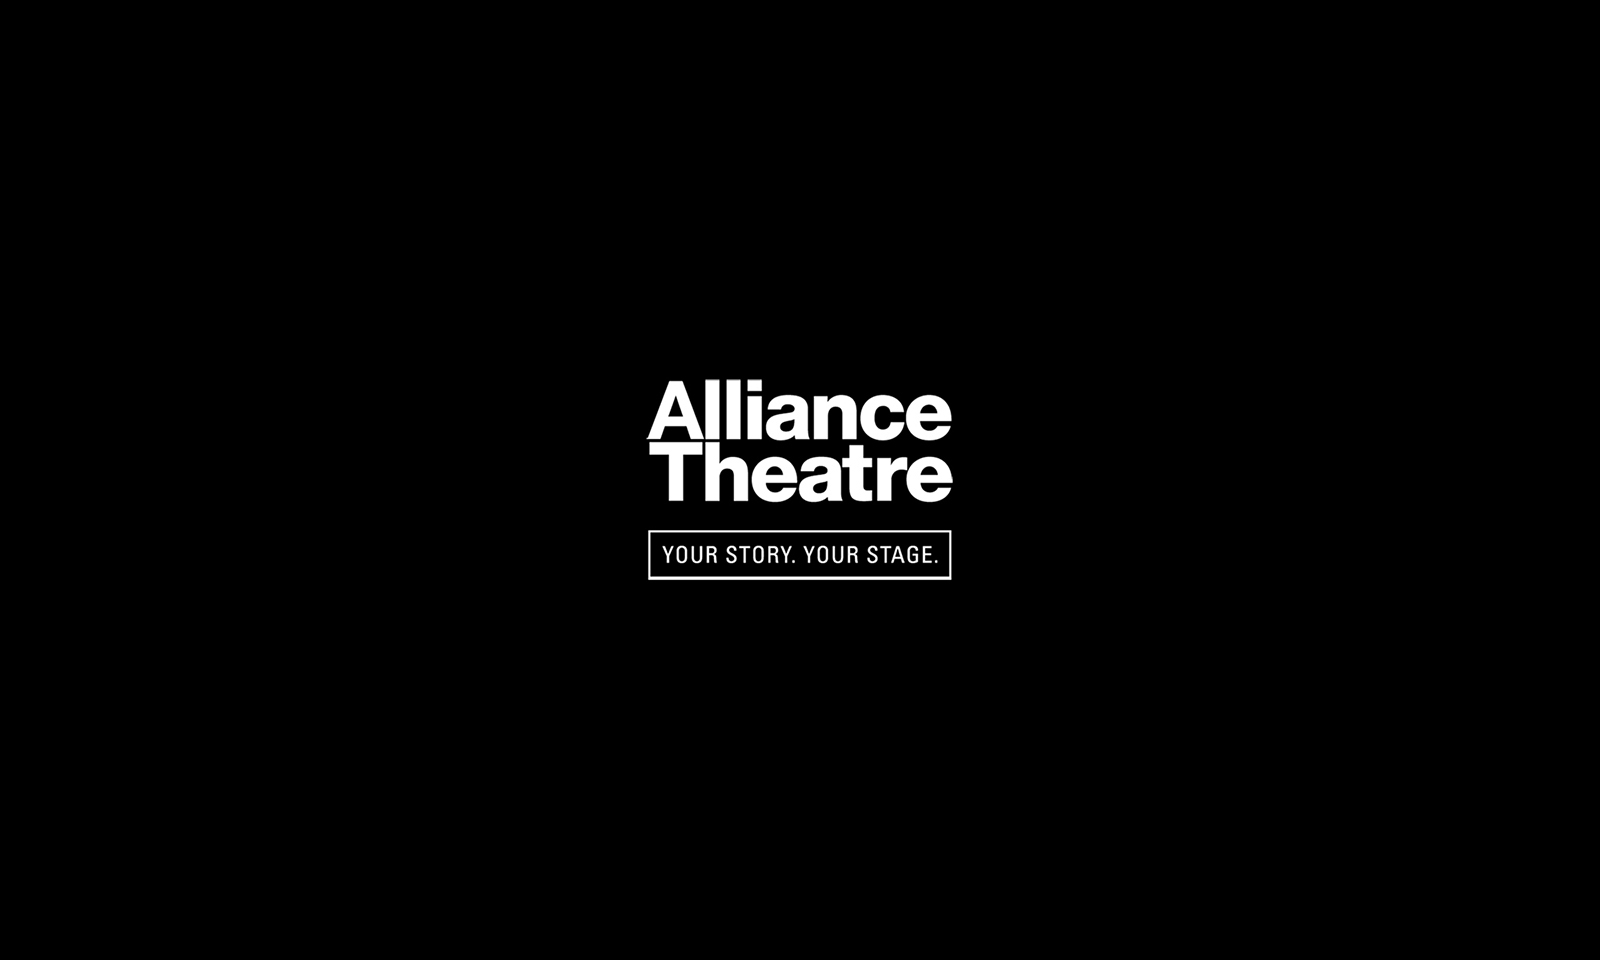 A Statement from the Alliance